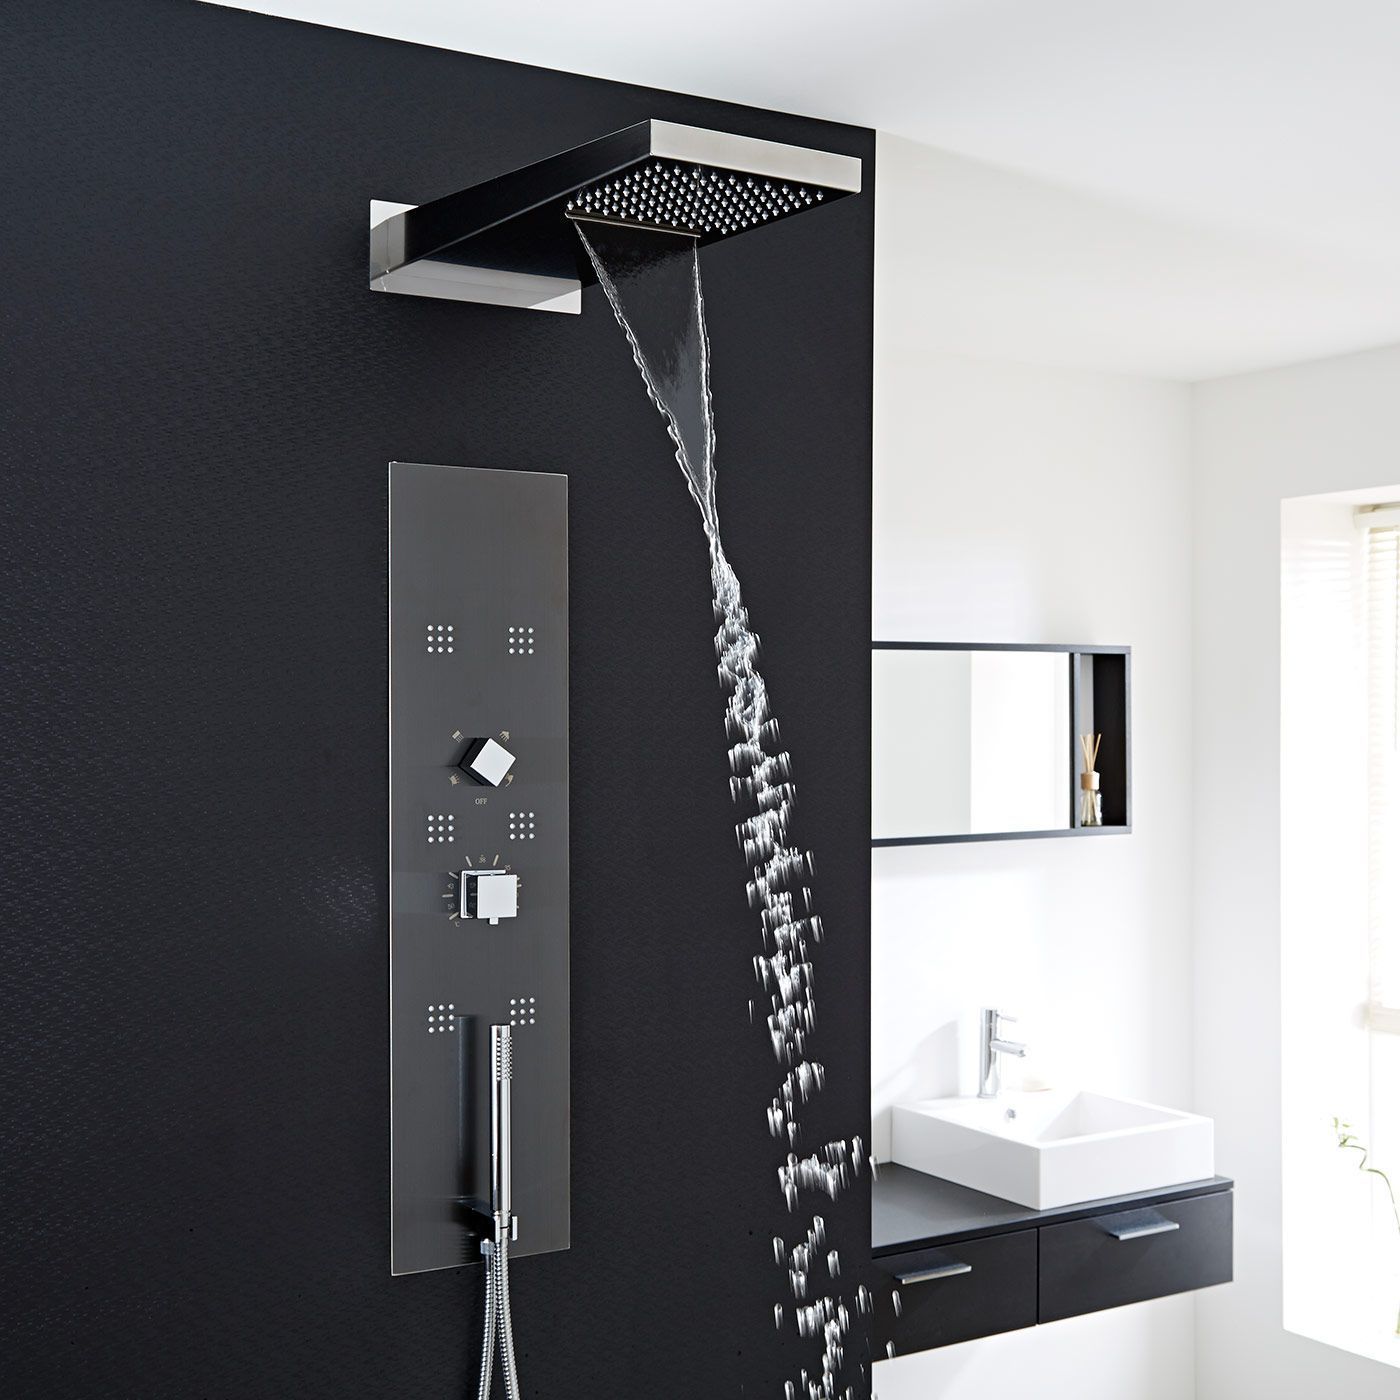 Looking for stylish shower panels in a budget? Get In Hours is the way to go!